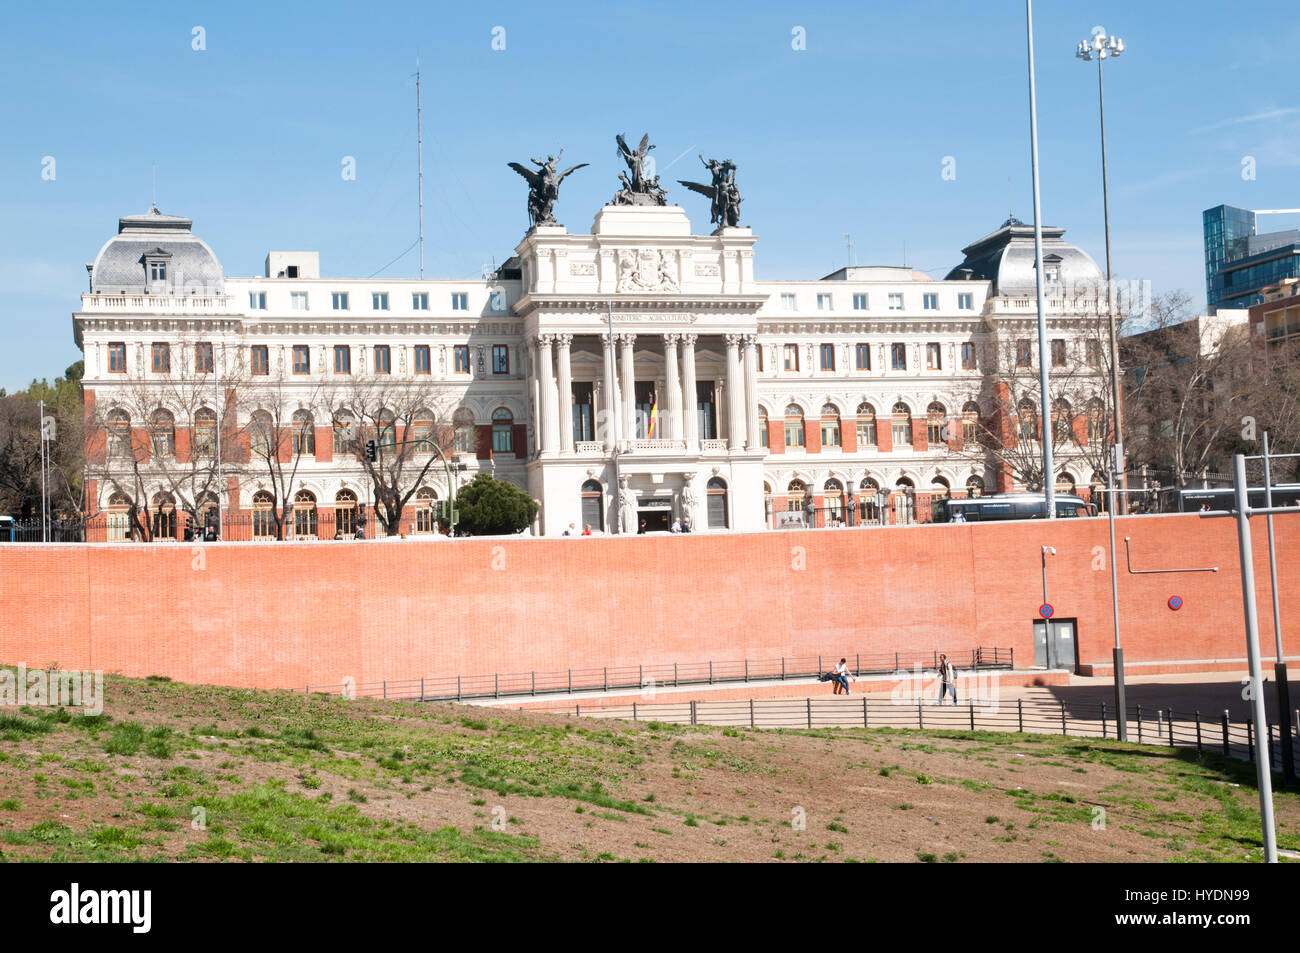 Ministerio de Agricultura (Ministry of Agriculture) building, Madrid, Spain Stock Photo